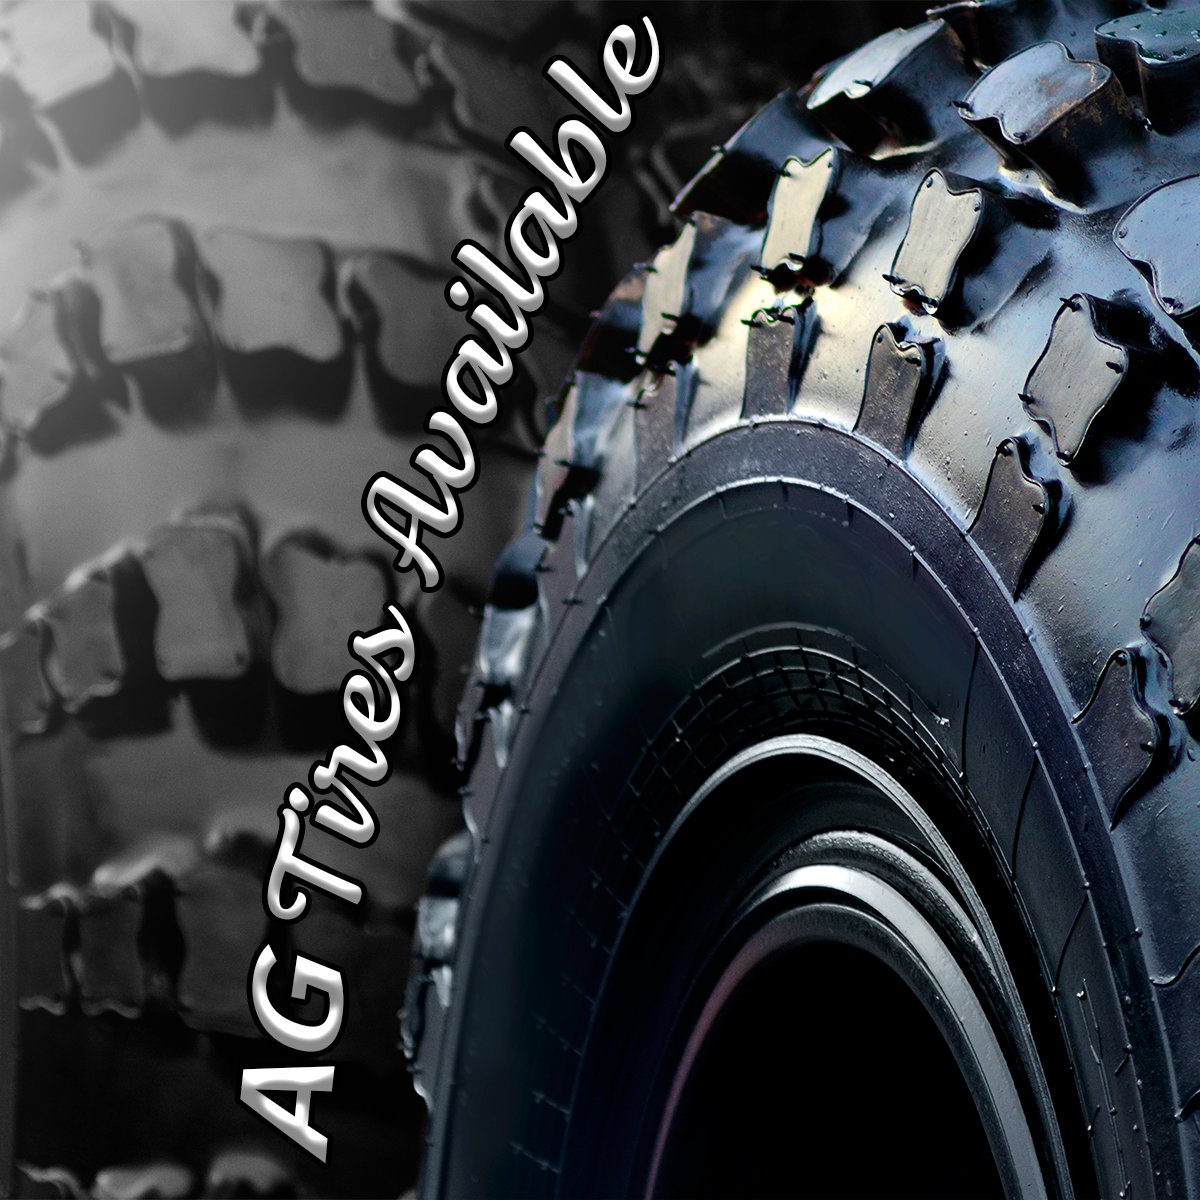 That's right, we carry AG tires! 

📞(972) 542-3471
💻thomasontire.net
📍211 N. McDonald Street, McKinney, TX 75069